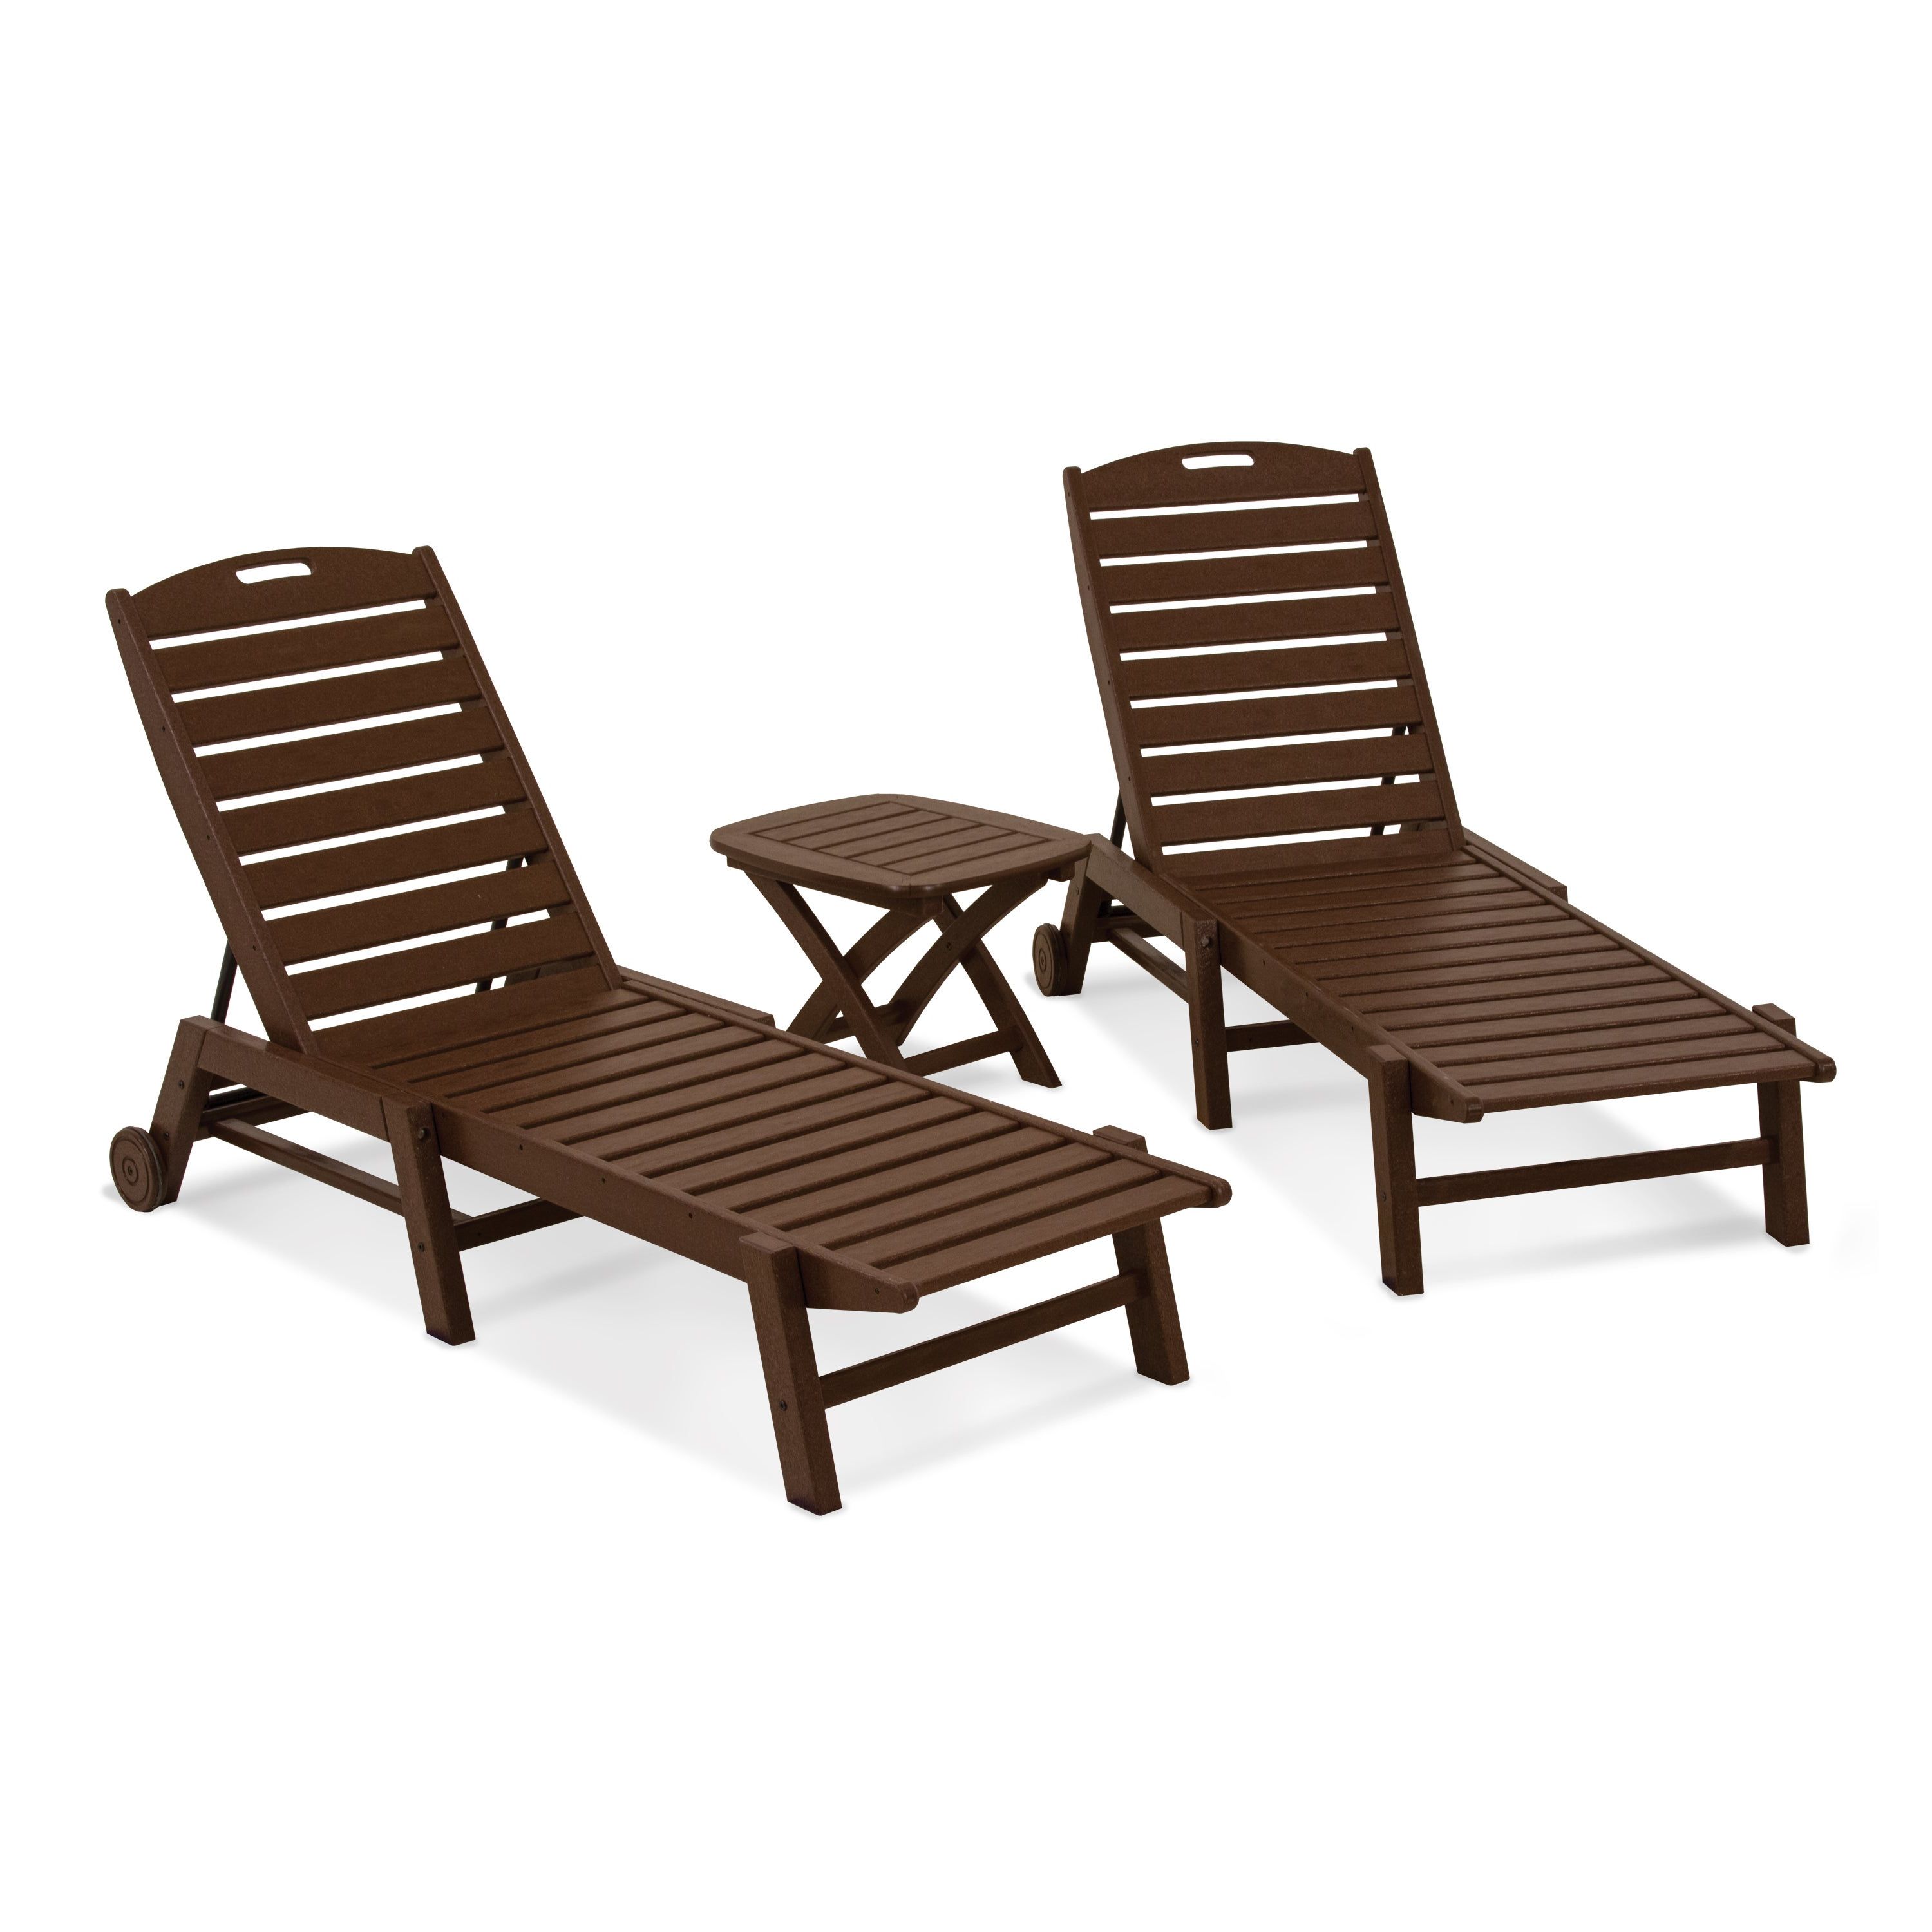 Popular Nautical 3 Piece Outdoor Chaise Lounge Sets With Wheels And Table With Regard To Polywood® Nautical 3 Piece Outdoor Chaise Lounge Set With Table (Photo 4 of 25)